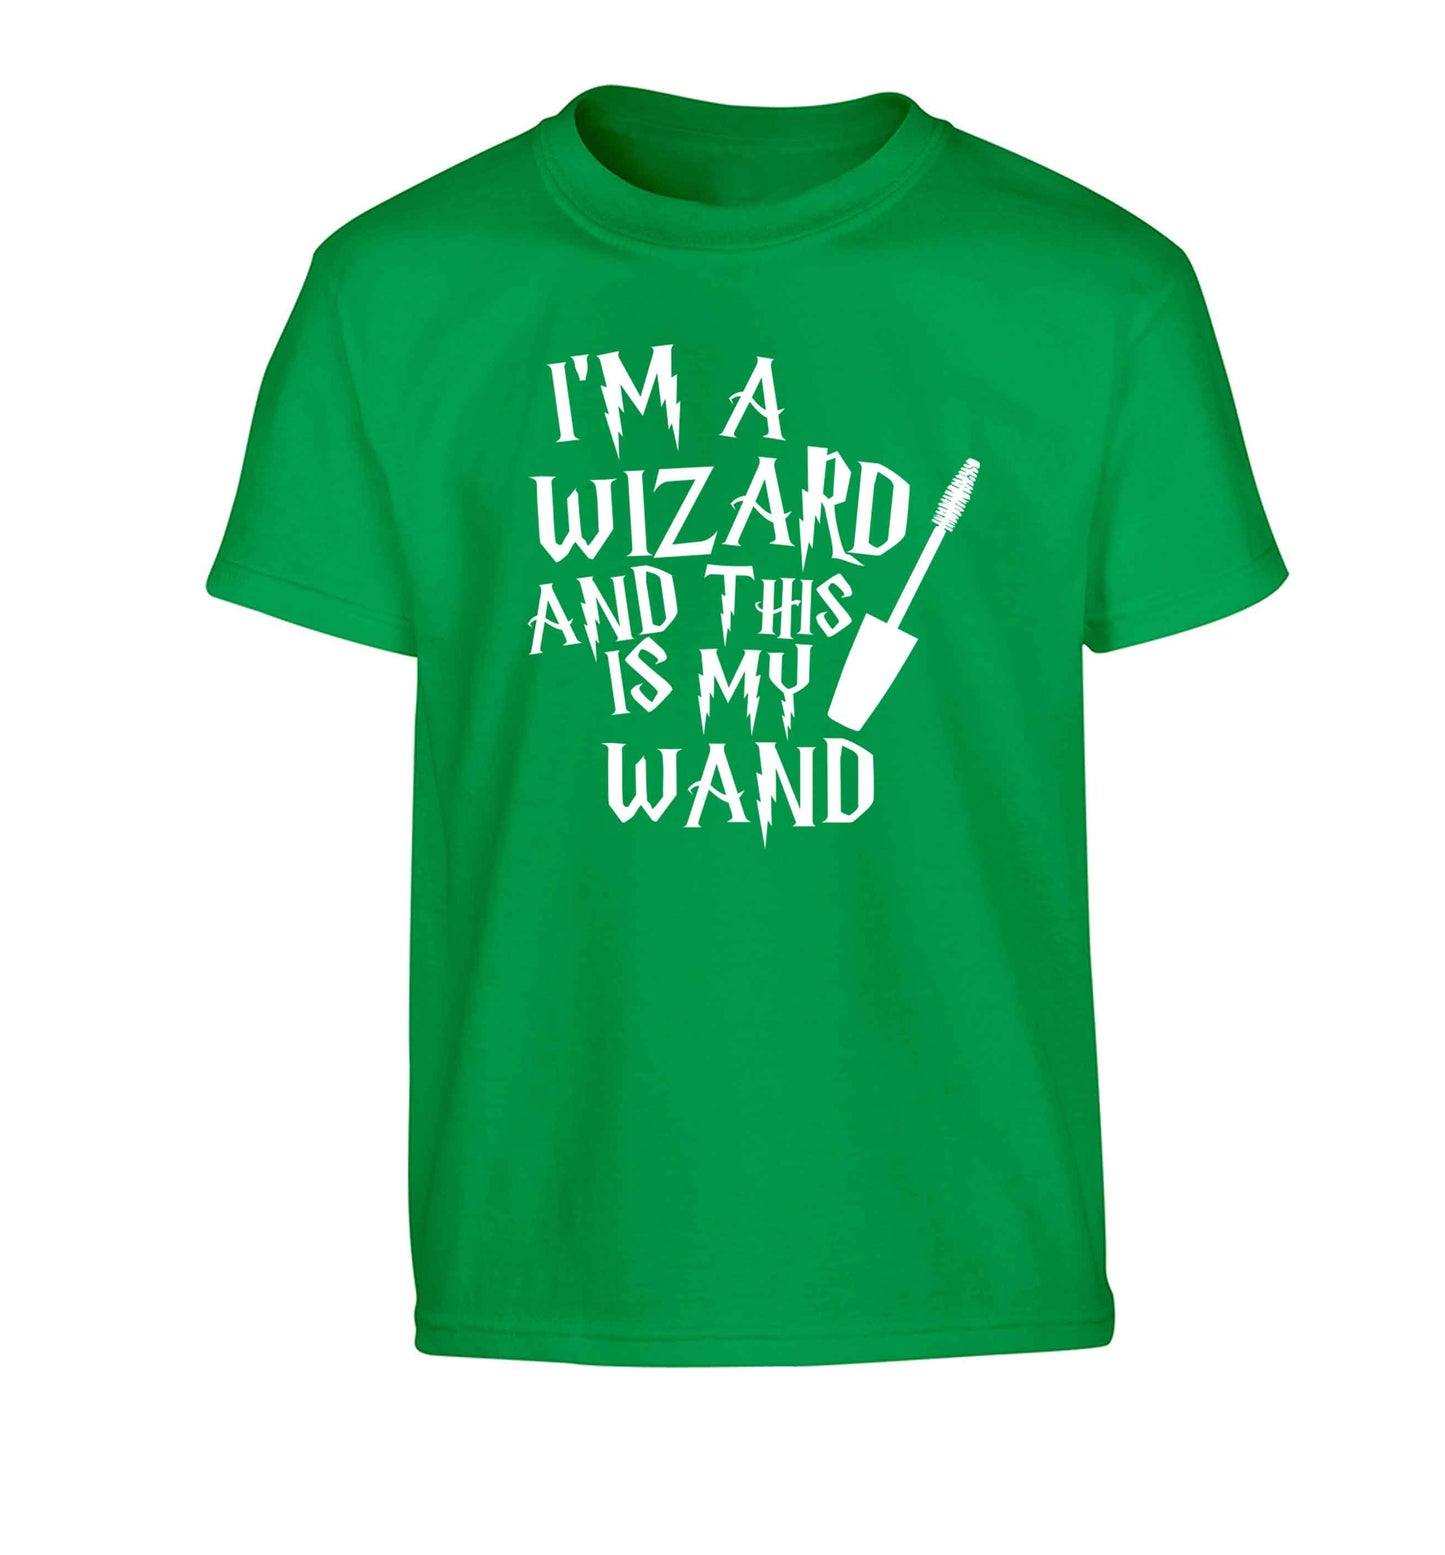 I'm a wizard and this is my wand Children's green Tshirt 12-13 Years